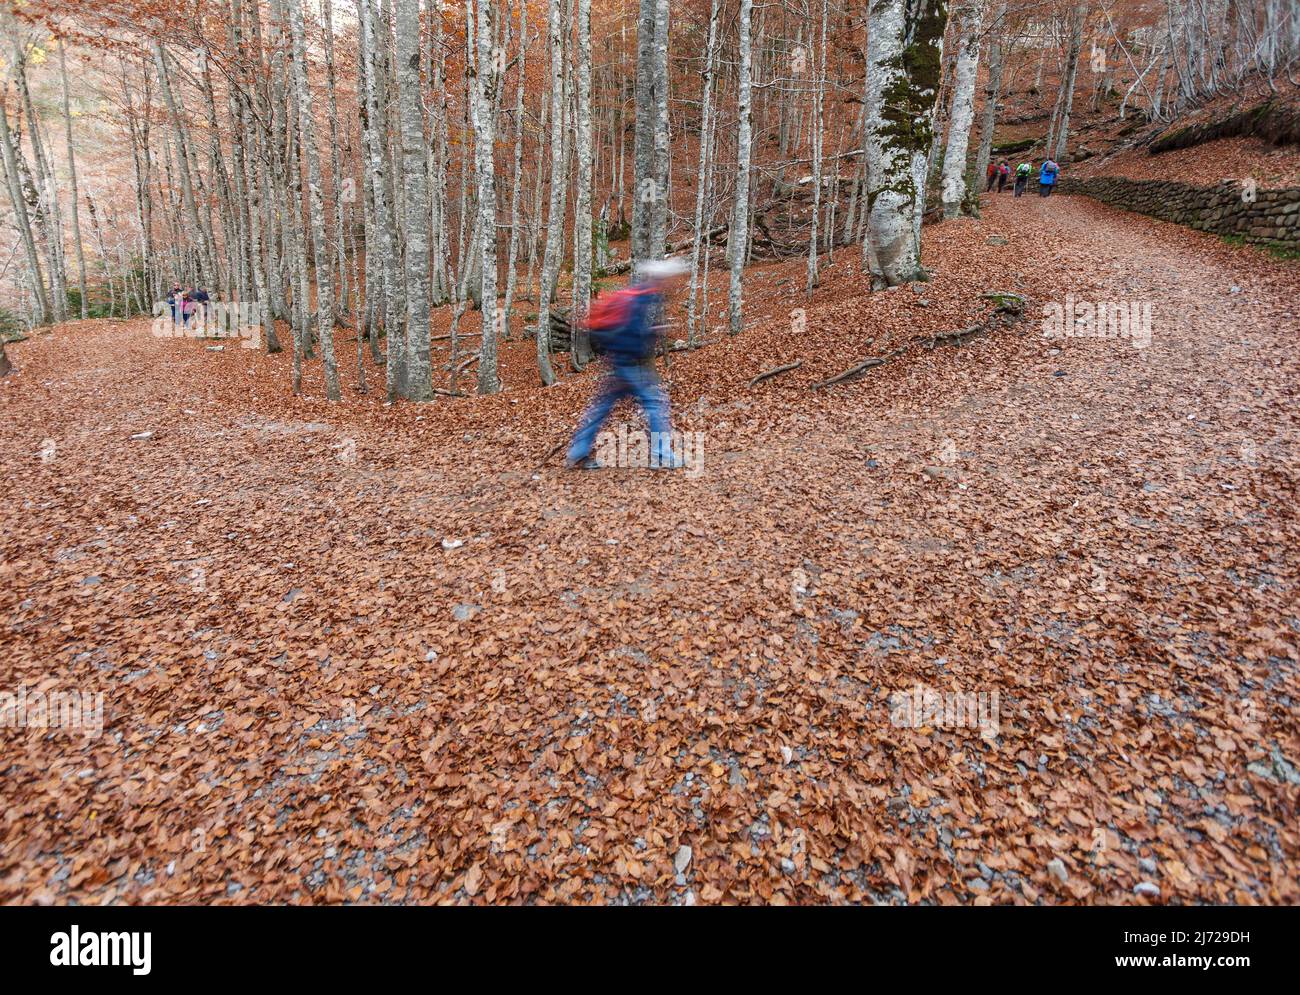 Hikers at forest in autumn, Ordesa and Monte Perdido national park, Pyrenees, Spain Stock Photo